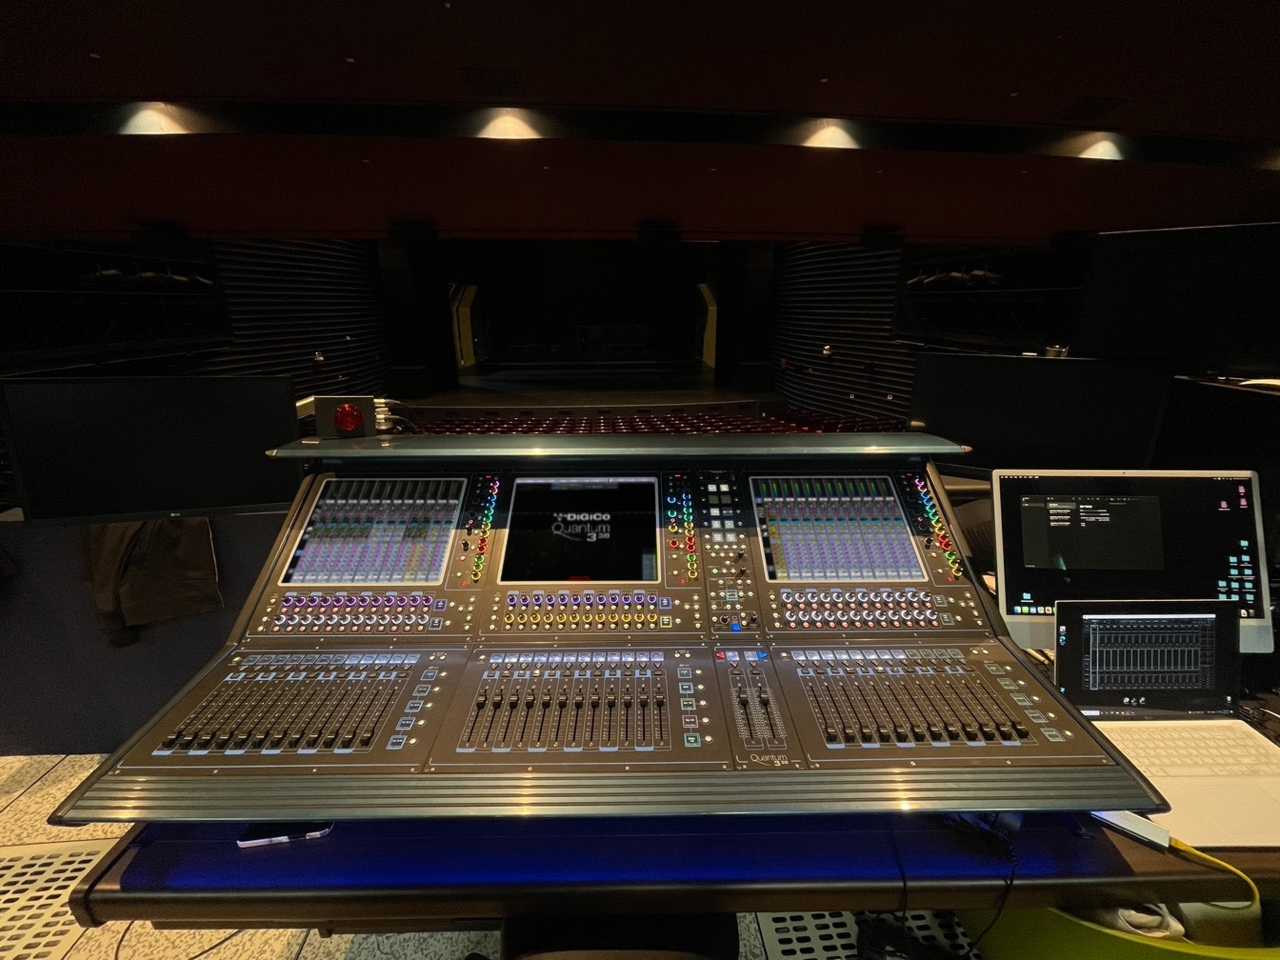 The Quantum 338 is deployed at front of house in the grand theatre